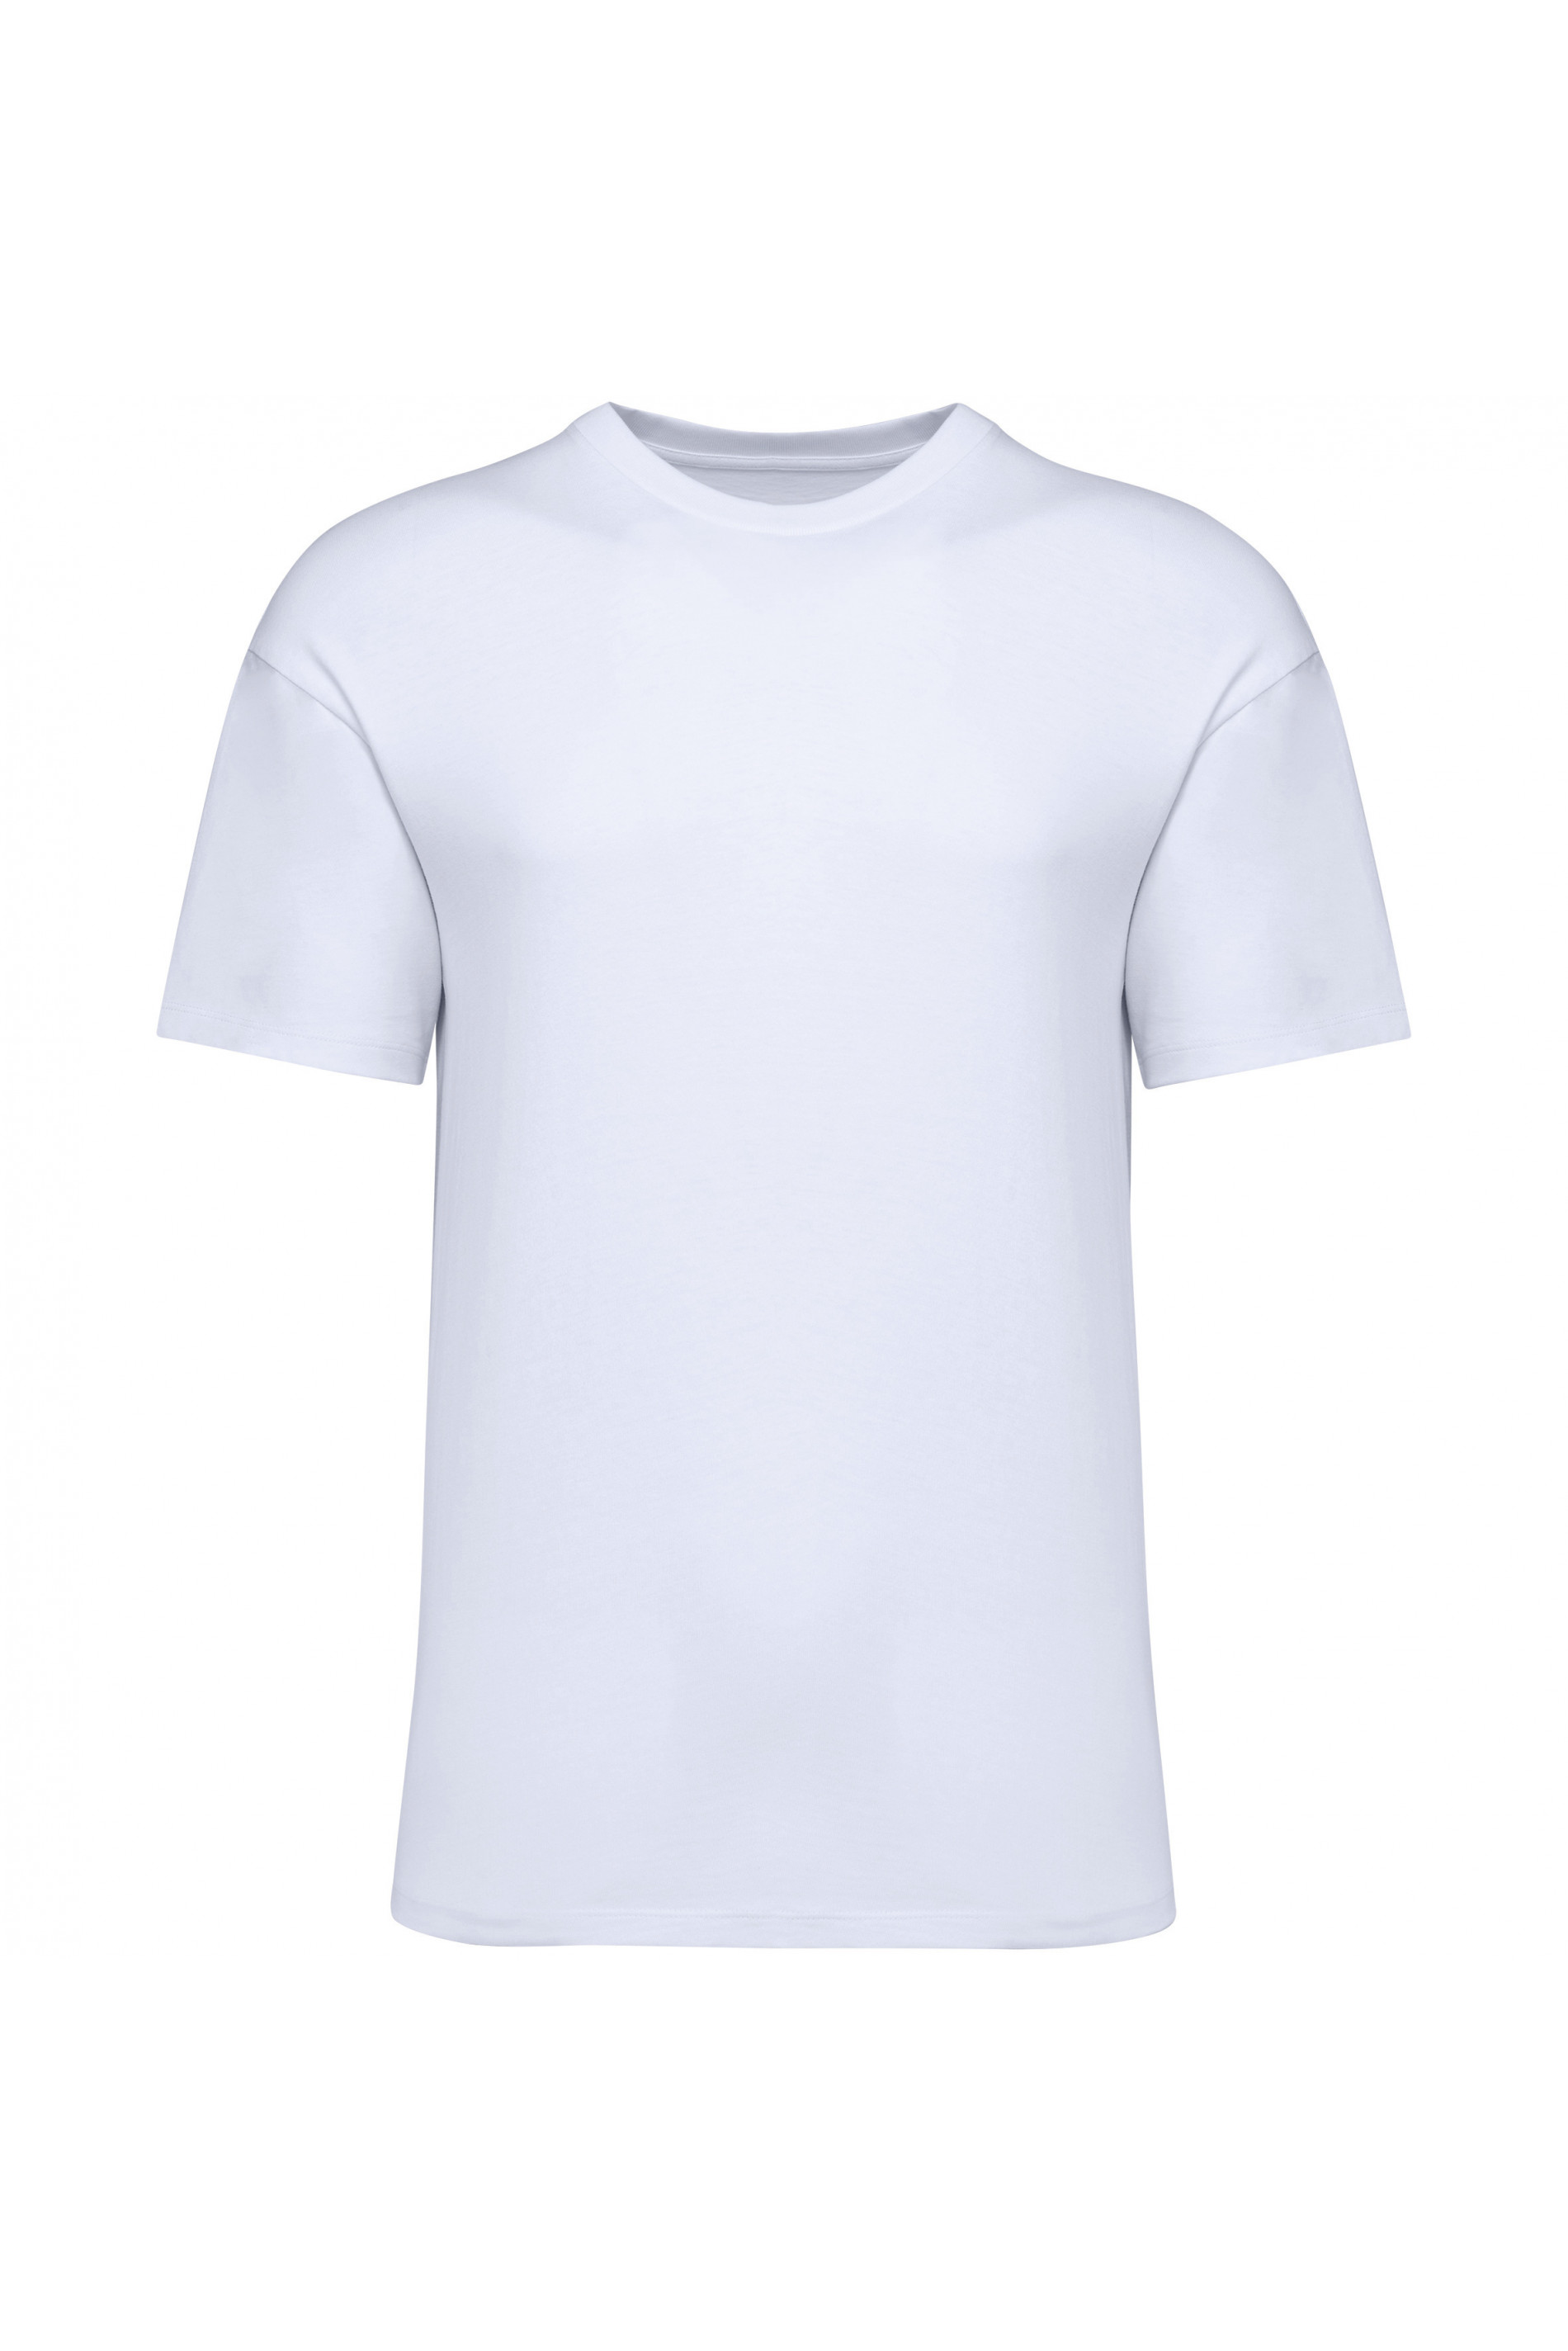 Organic T-shirt with dropped shoulders 200 g/m²